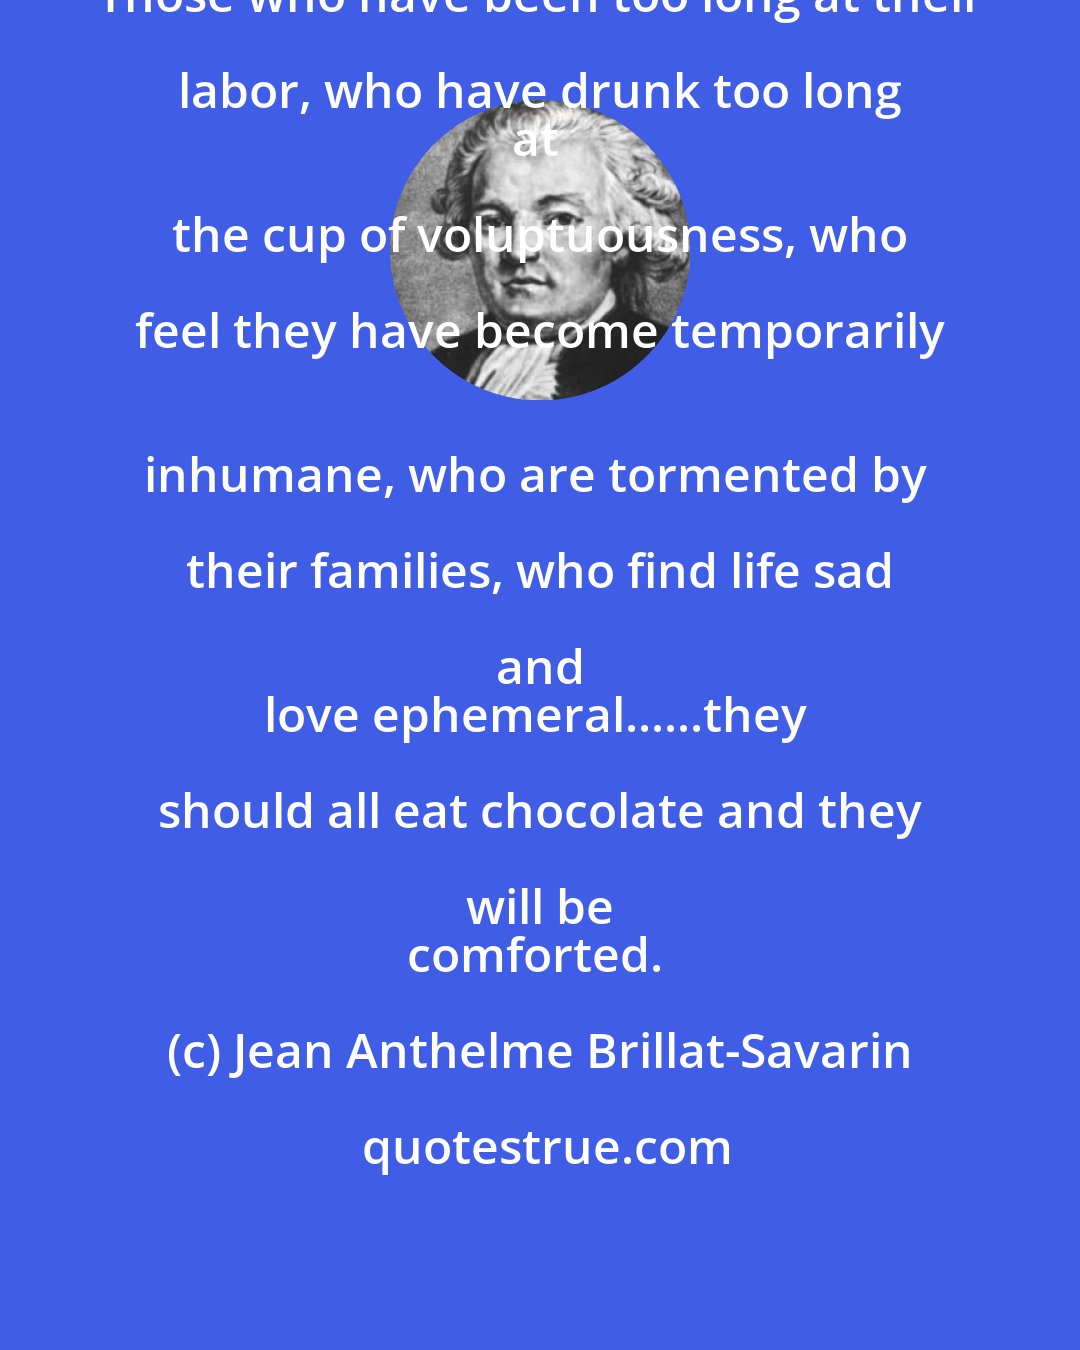 Jean Anthelme Brillat-Savarin: Those who have been too long at their labor, who have drunk too long 
at the cup of voluptuousness, who feel they have become temporarily 
inhumane, who are tormented by their families, who find life sad and 
love ephemeral......they should all eat chocolate and they will be 
comforted.